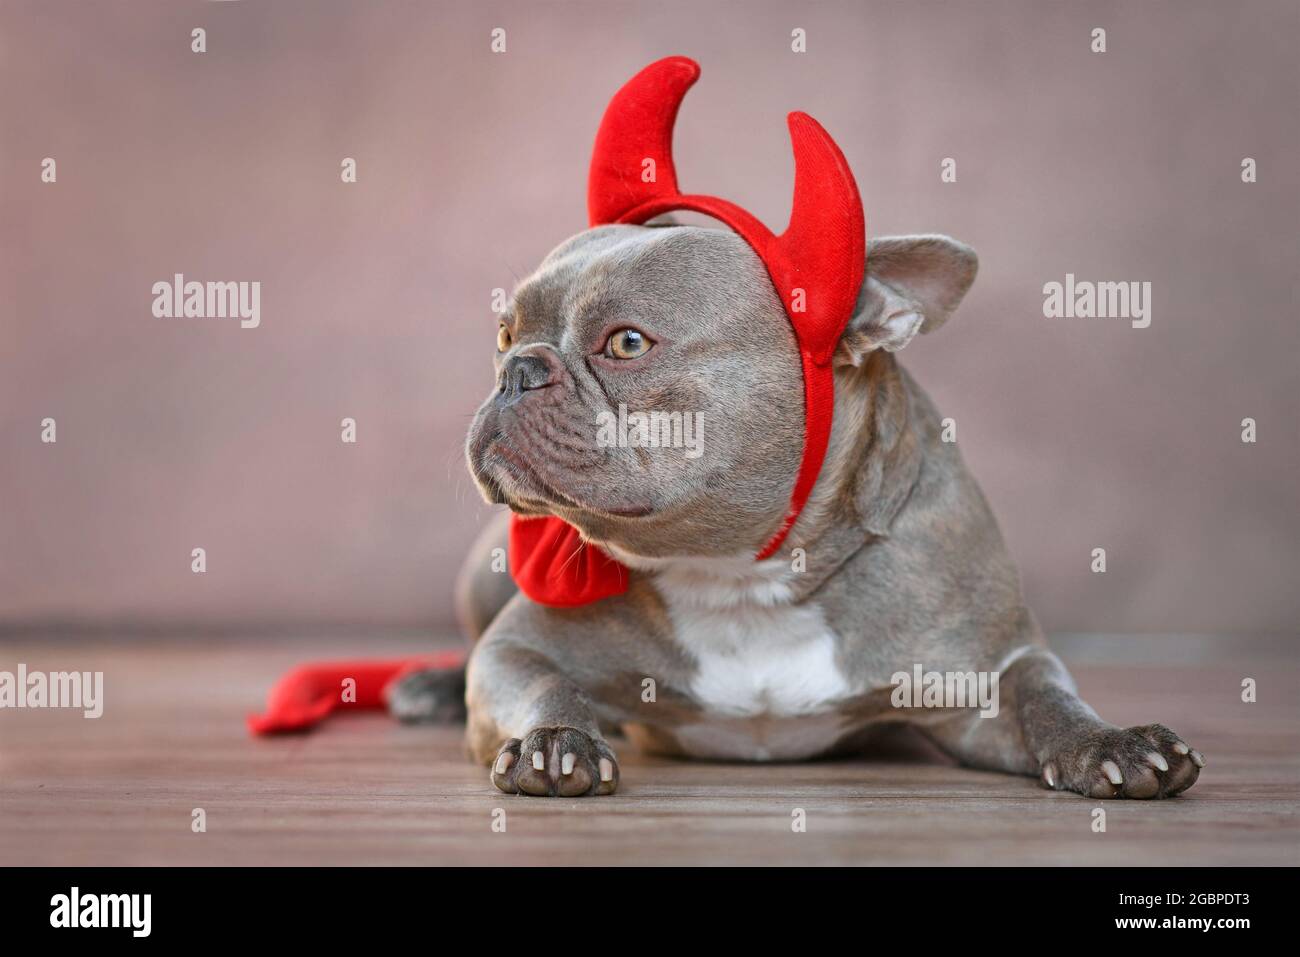 French Bulldog dog wearing red devil horns, tail and bow tie Halloween costume in front of gray background Stock Photo